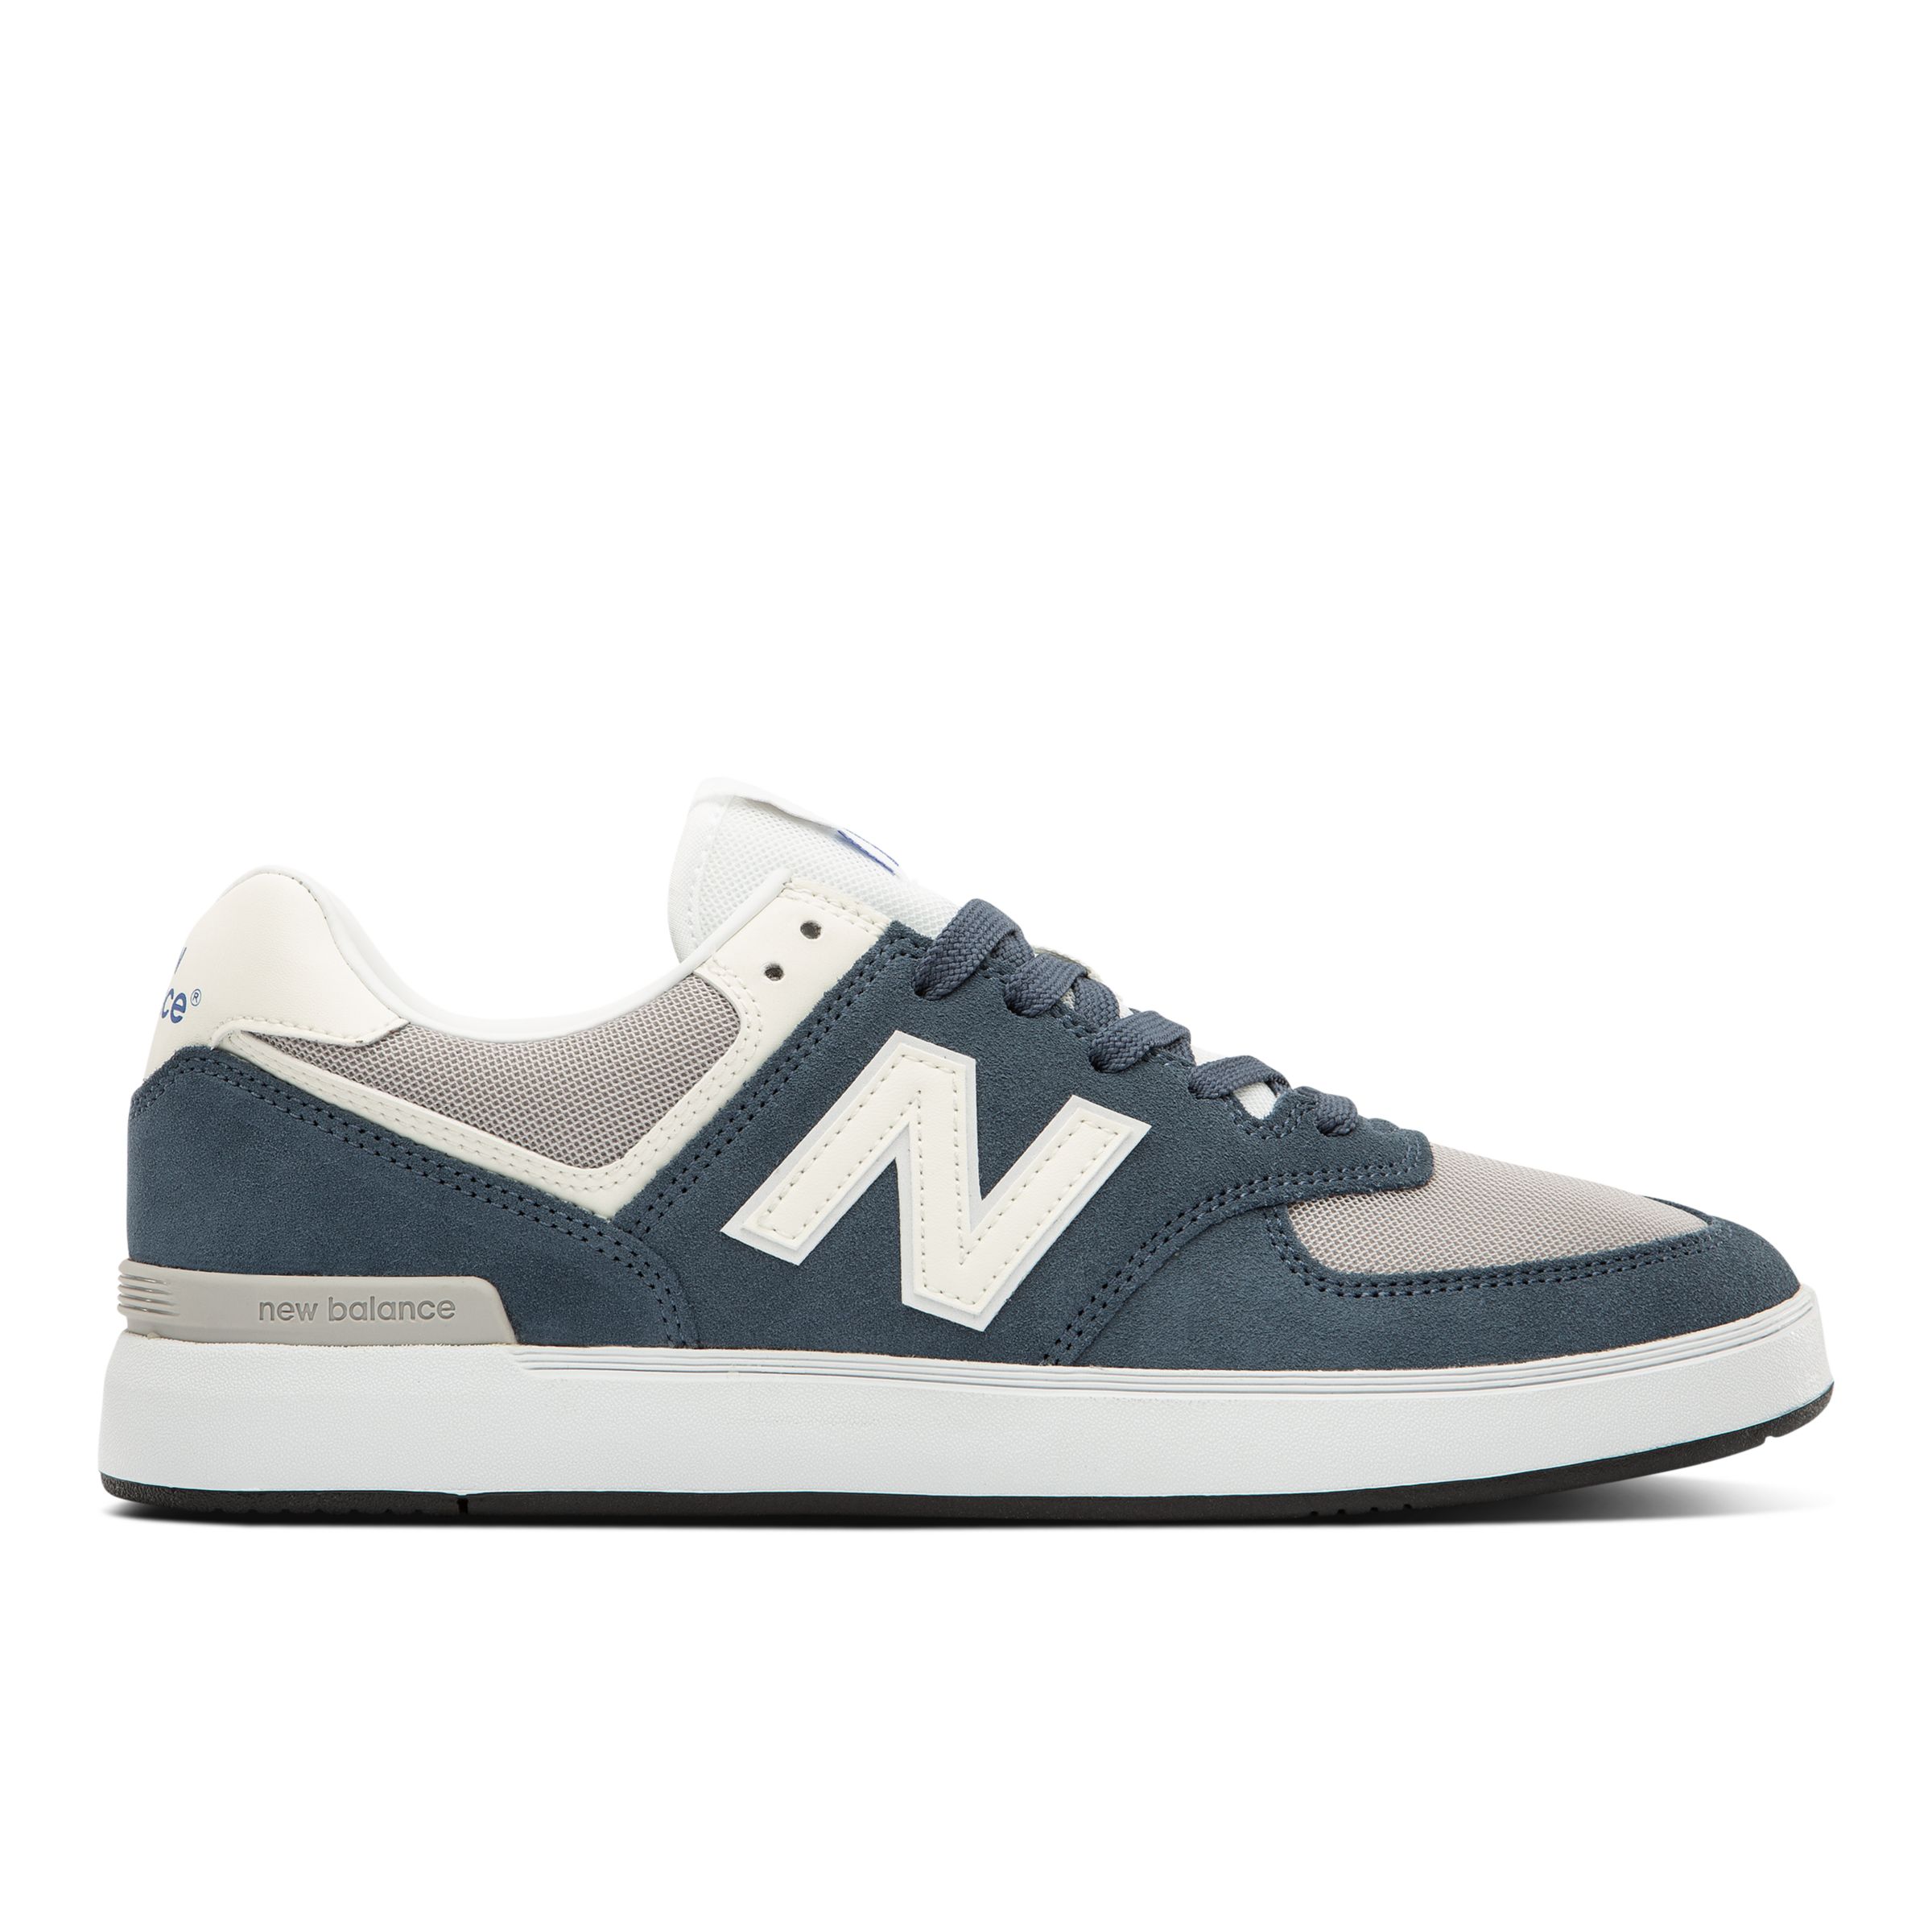 new balance 574 sneakers